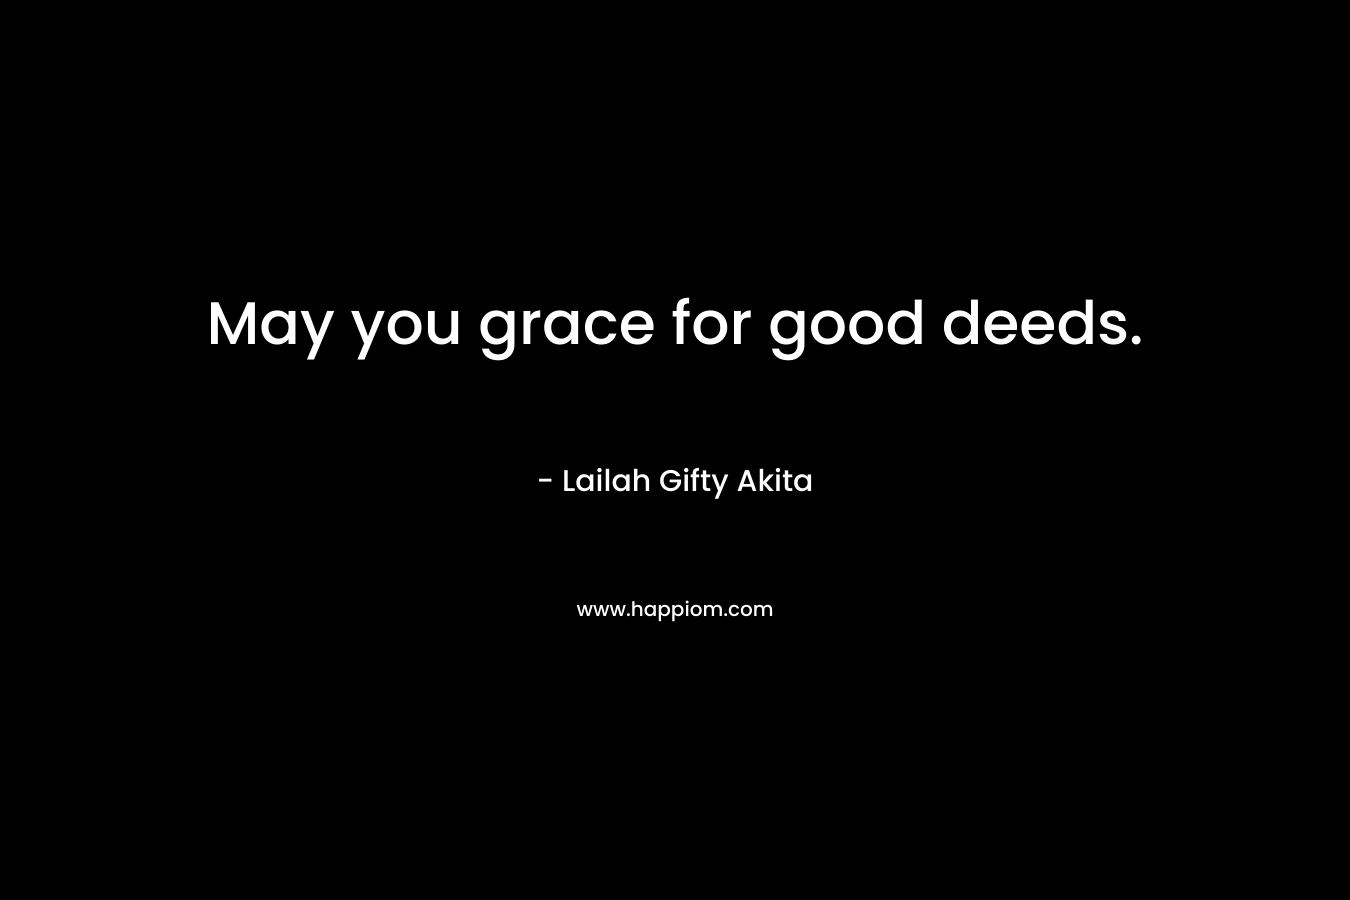 May you grace for good deeds.